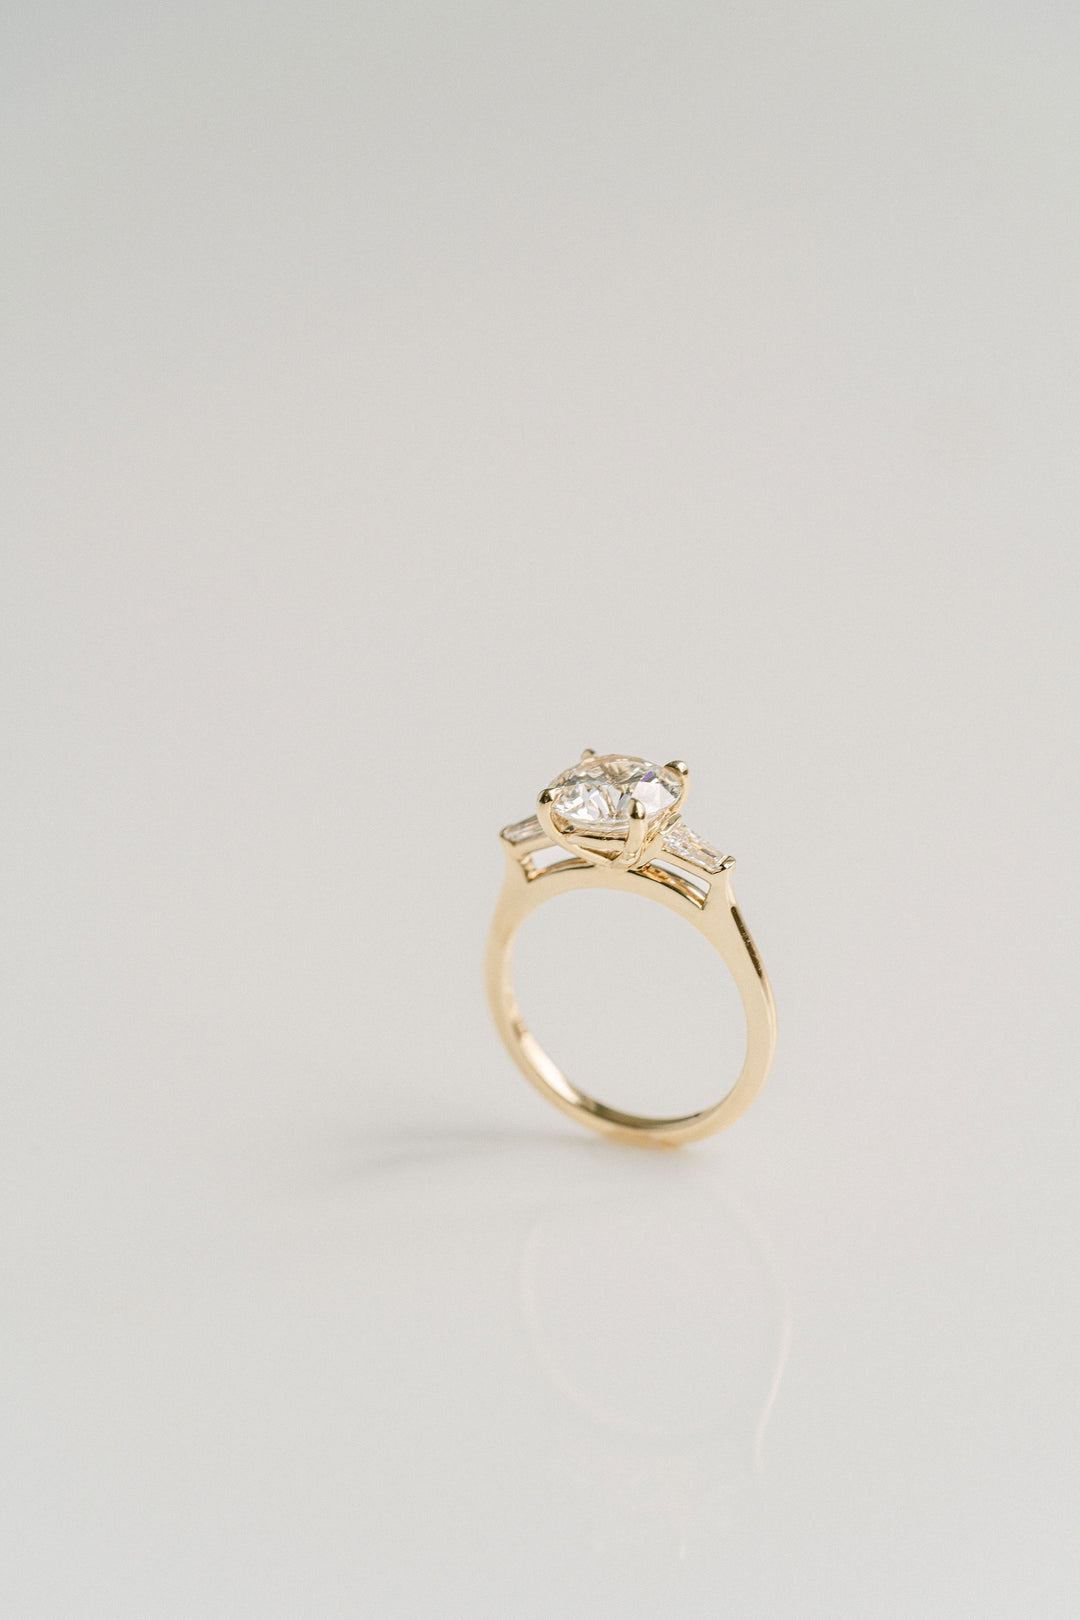 Round Brilliant Diamond Engagement Ring With Tapered Baguette Accents, 14k Yellow Gold